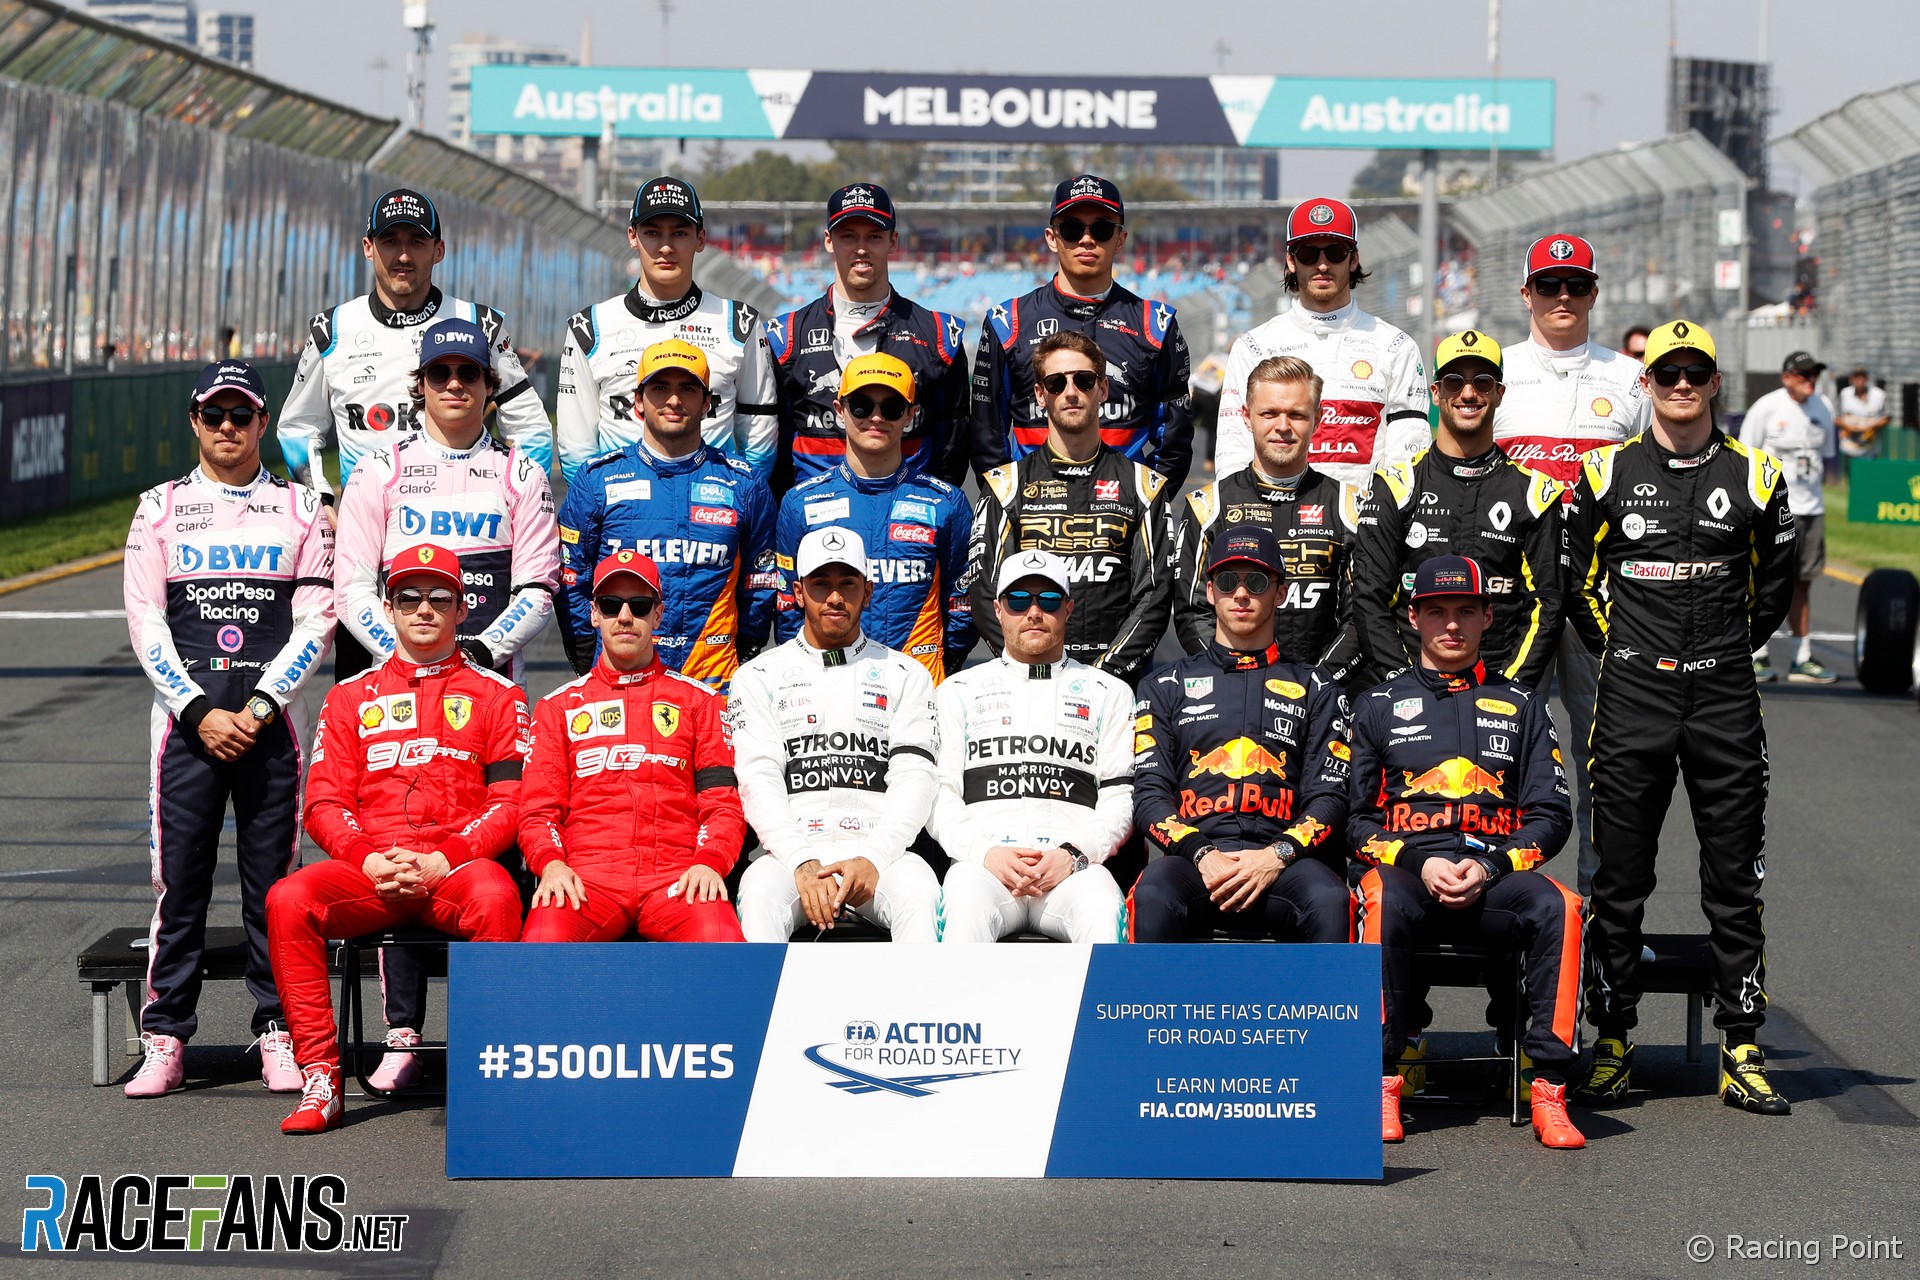 The 2019 F1 drivers pictured at the start of the season in Australia